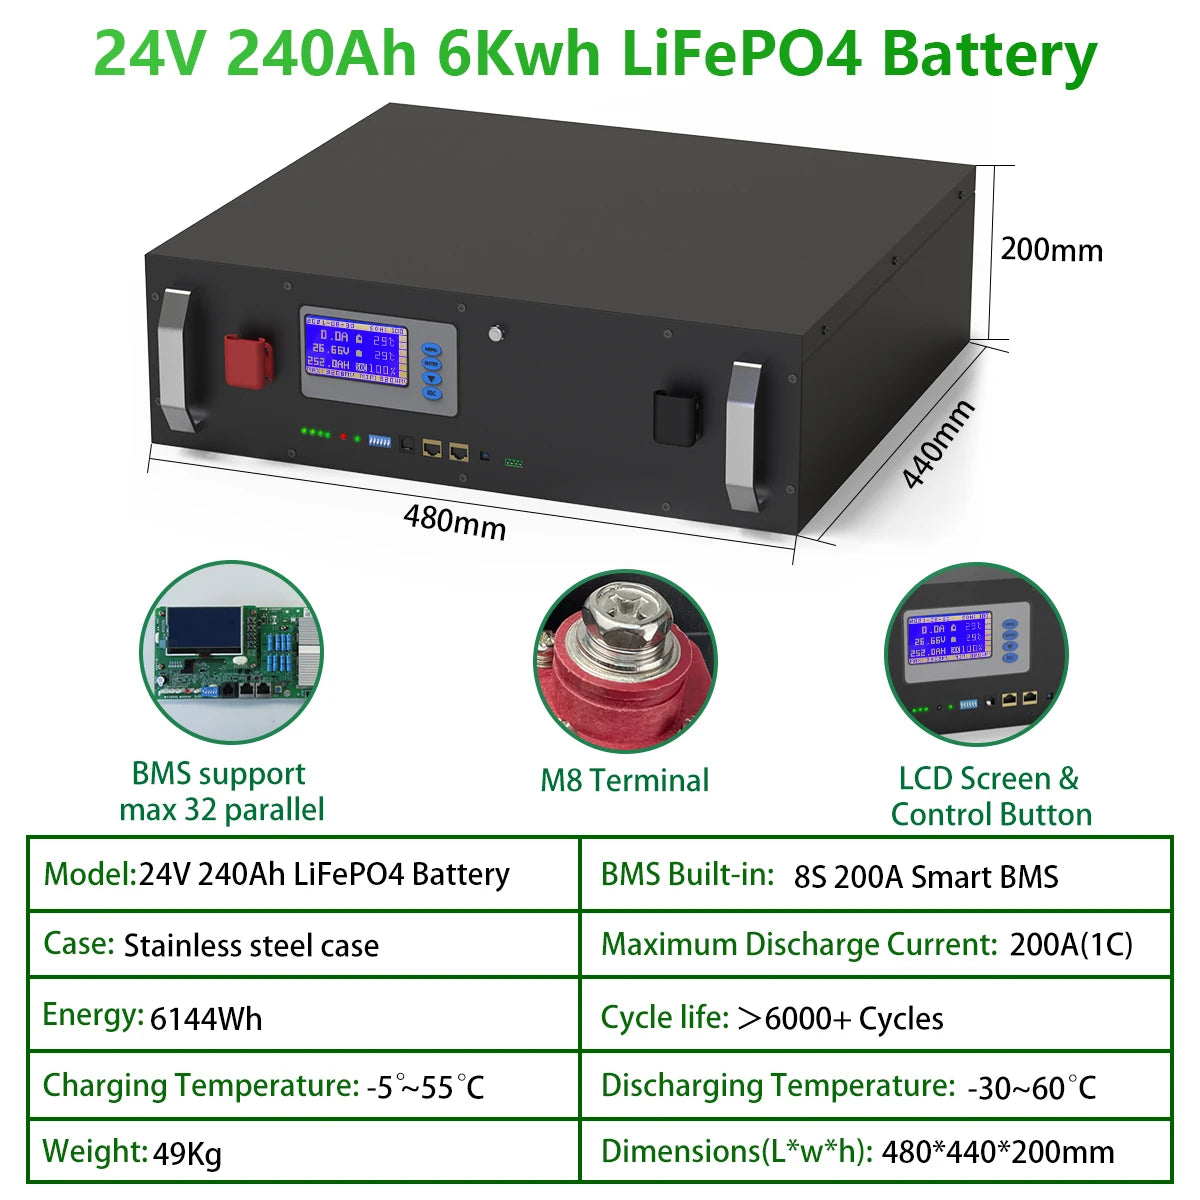 LiFePO4 24V 240Ah 300Ah 200Ah 6144Wh Battery, High-capacity LiFePO4 battery pack with built-in BMS for reliable performance.